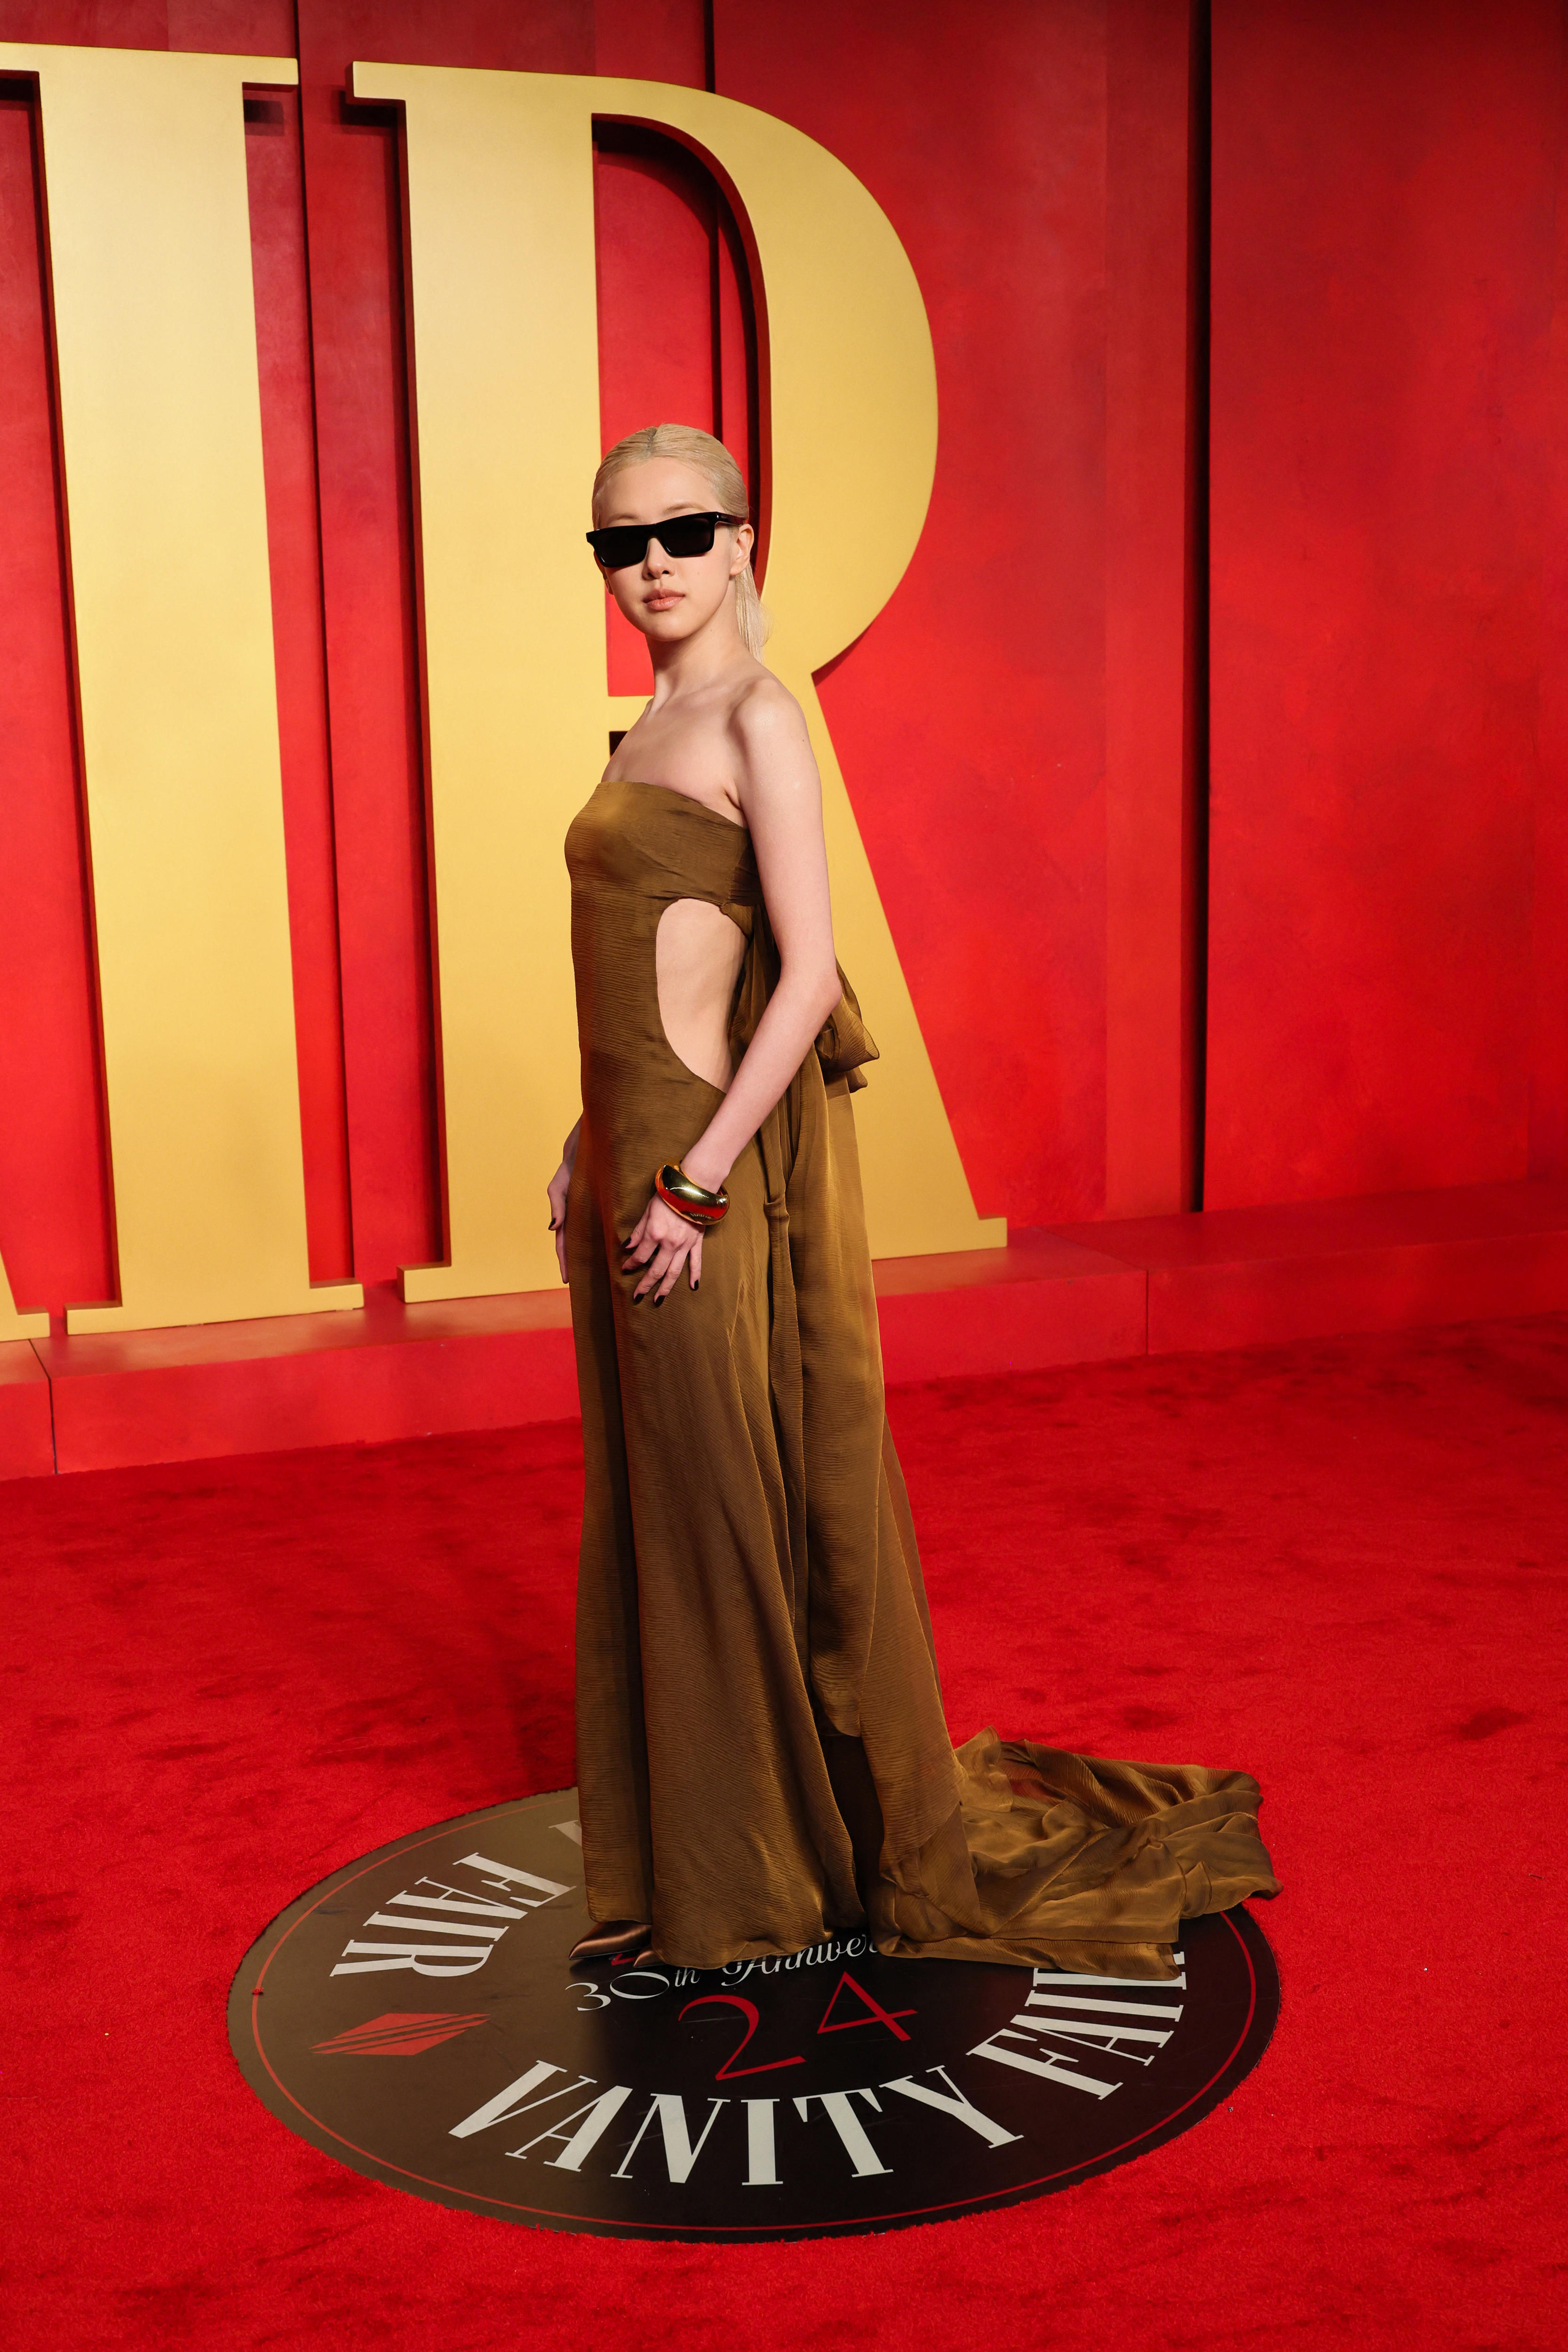 Rose wearing a mustard gold strapless gown with a cutout sides and a pair of black sunglasses